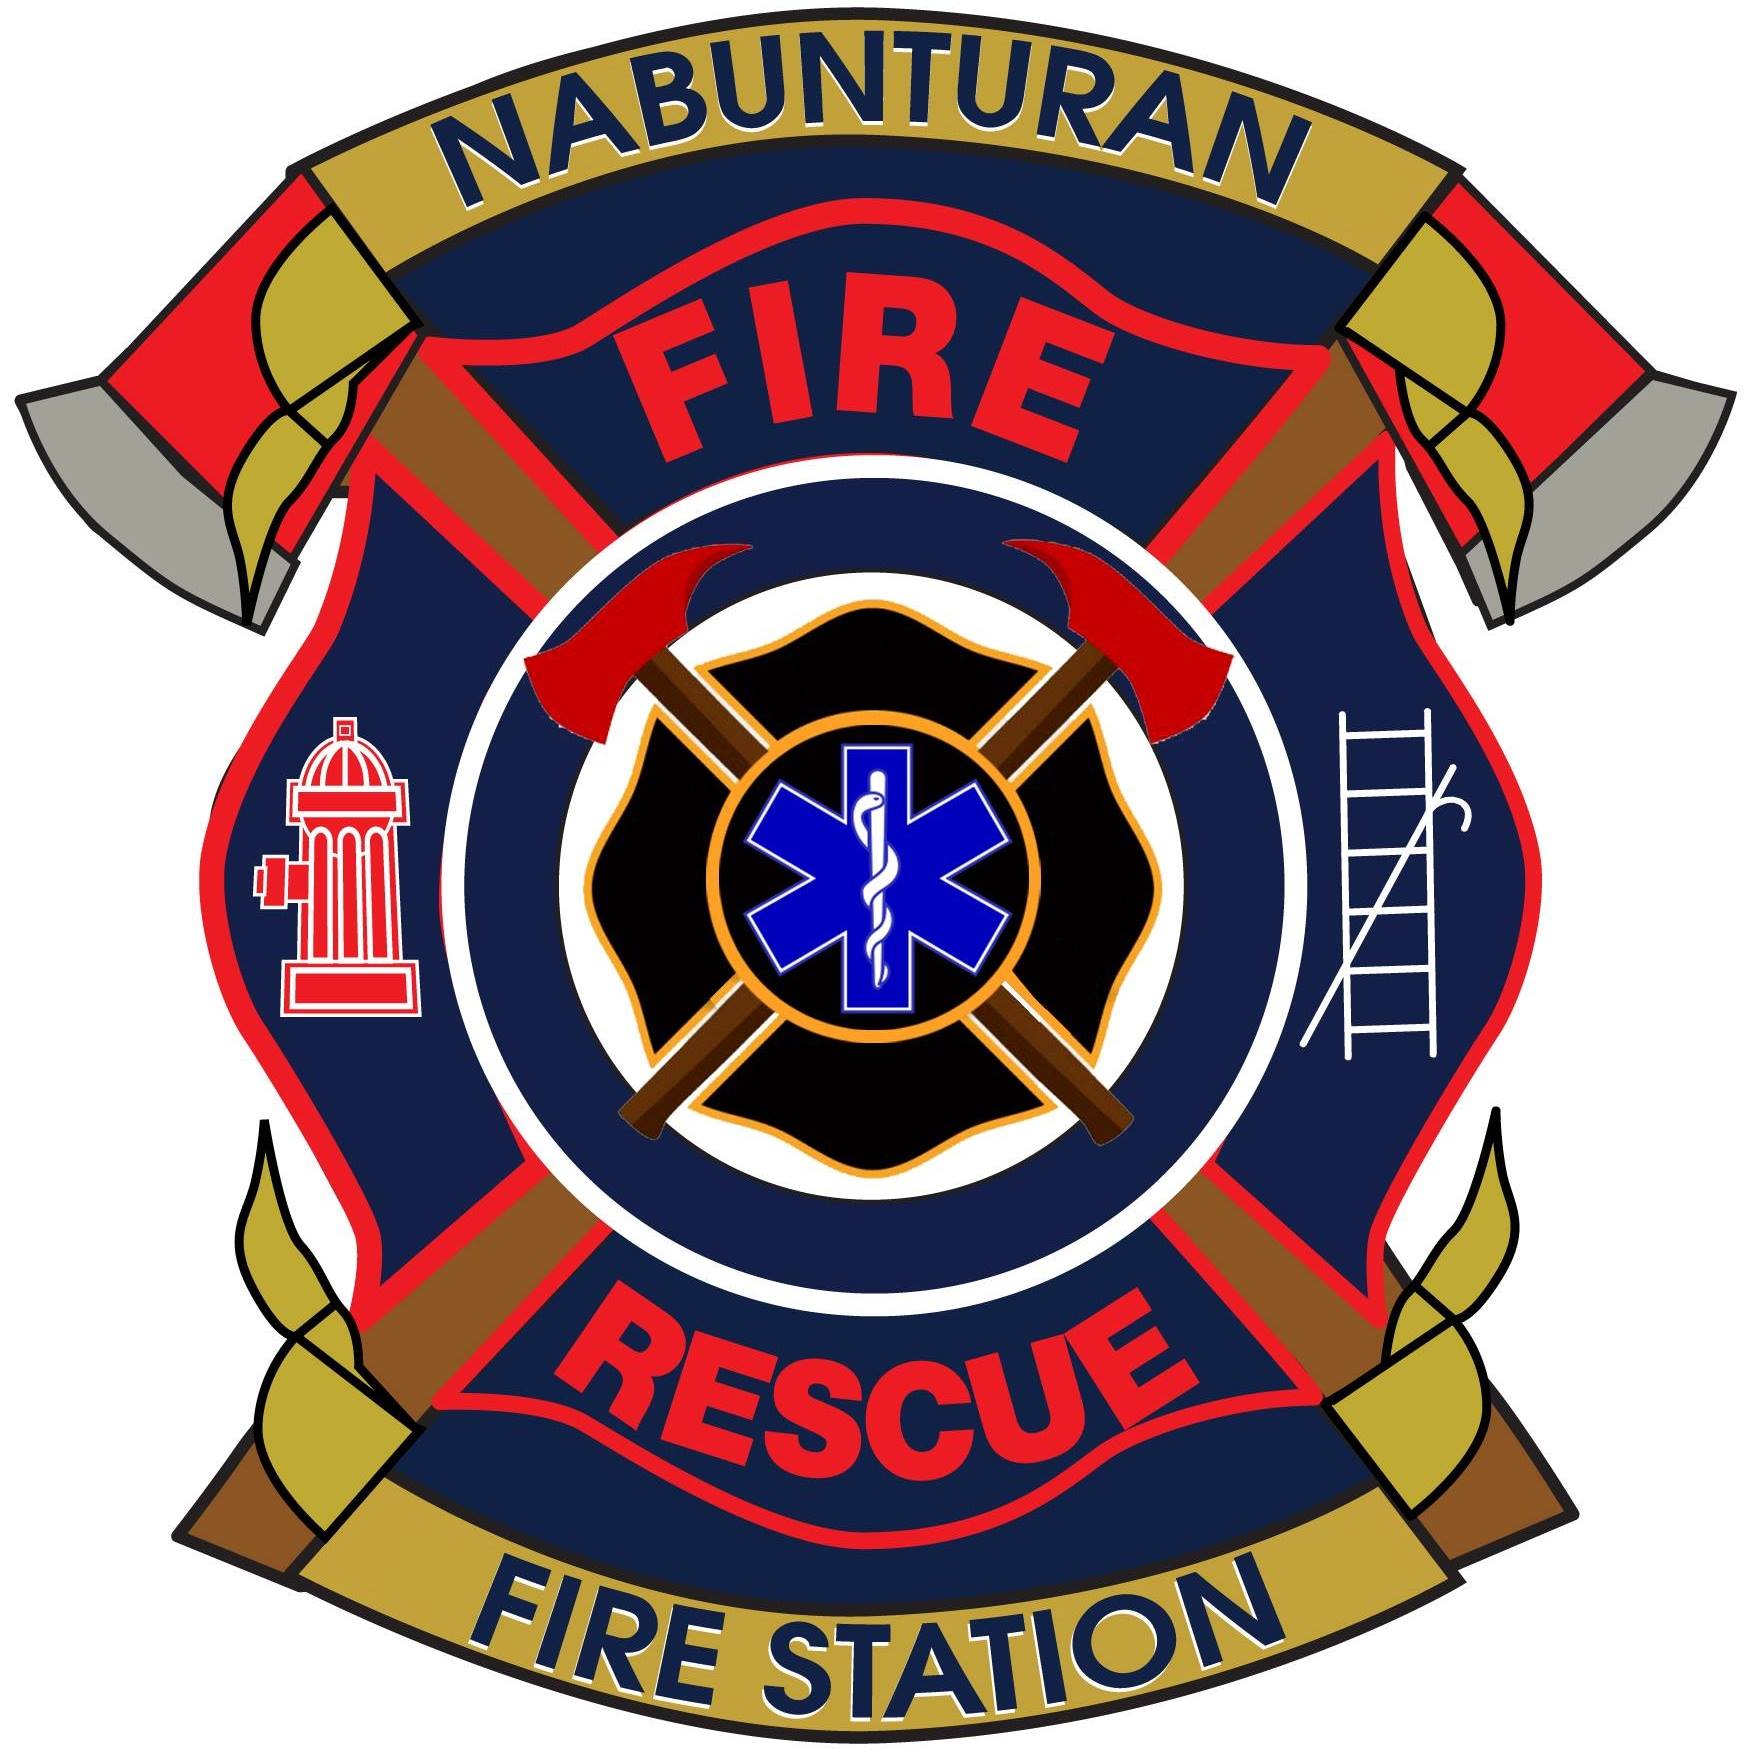 You are currently viewing Nabunturan Fire Station